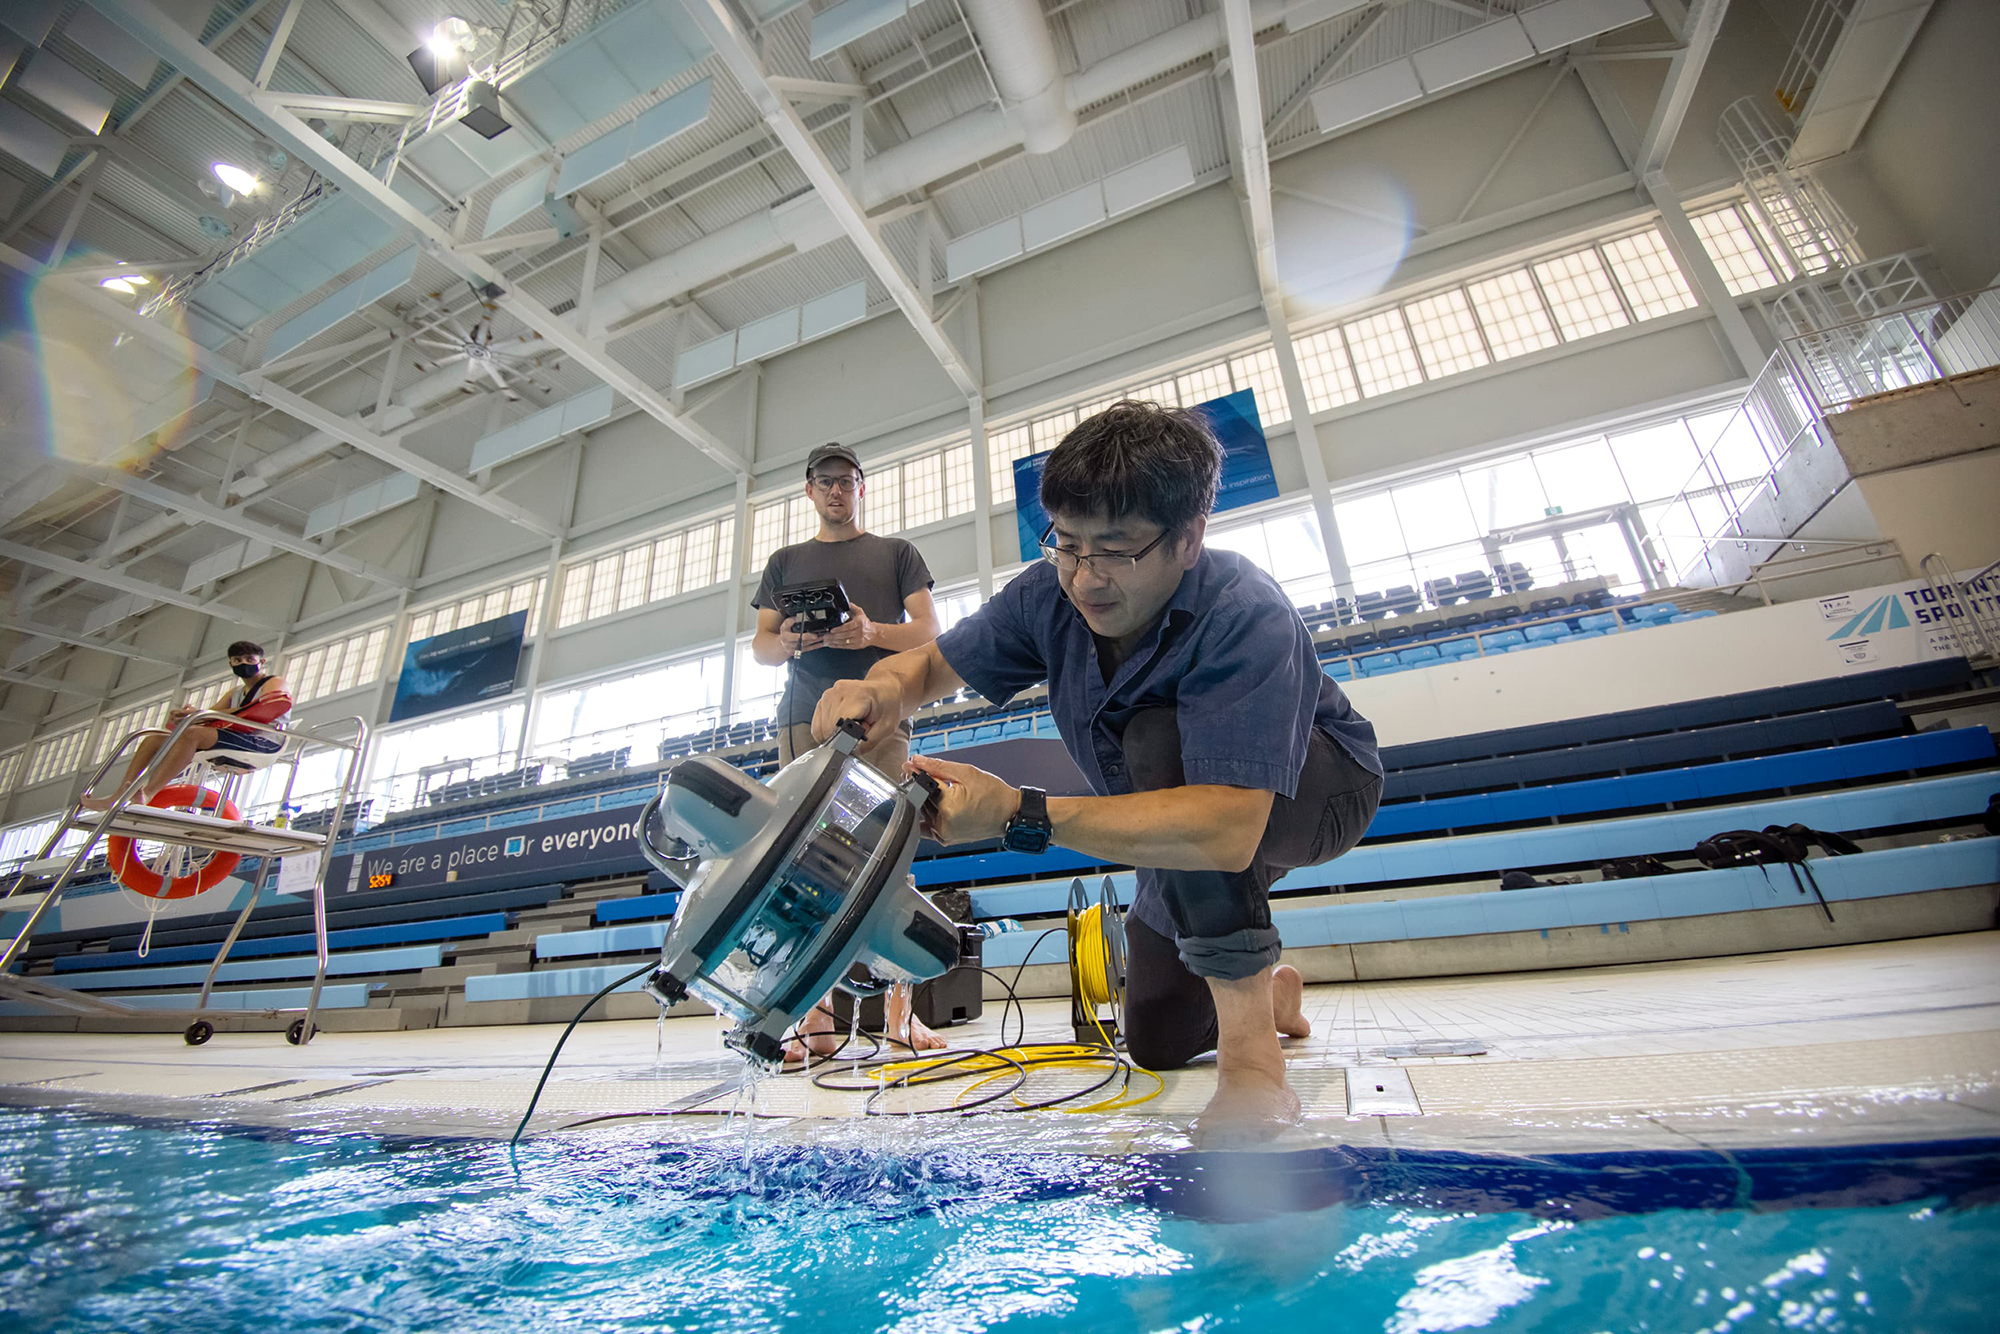 Chai Chen taking the underwater drone out of a pool, and Tom Meulendyk holding the controller